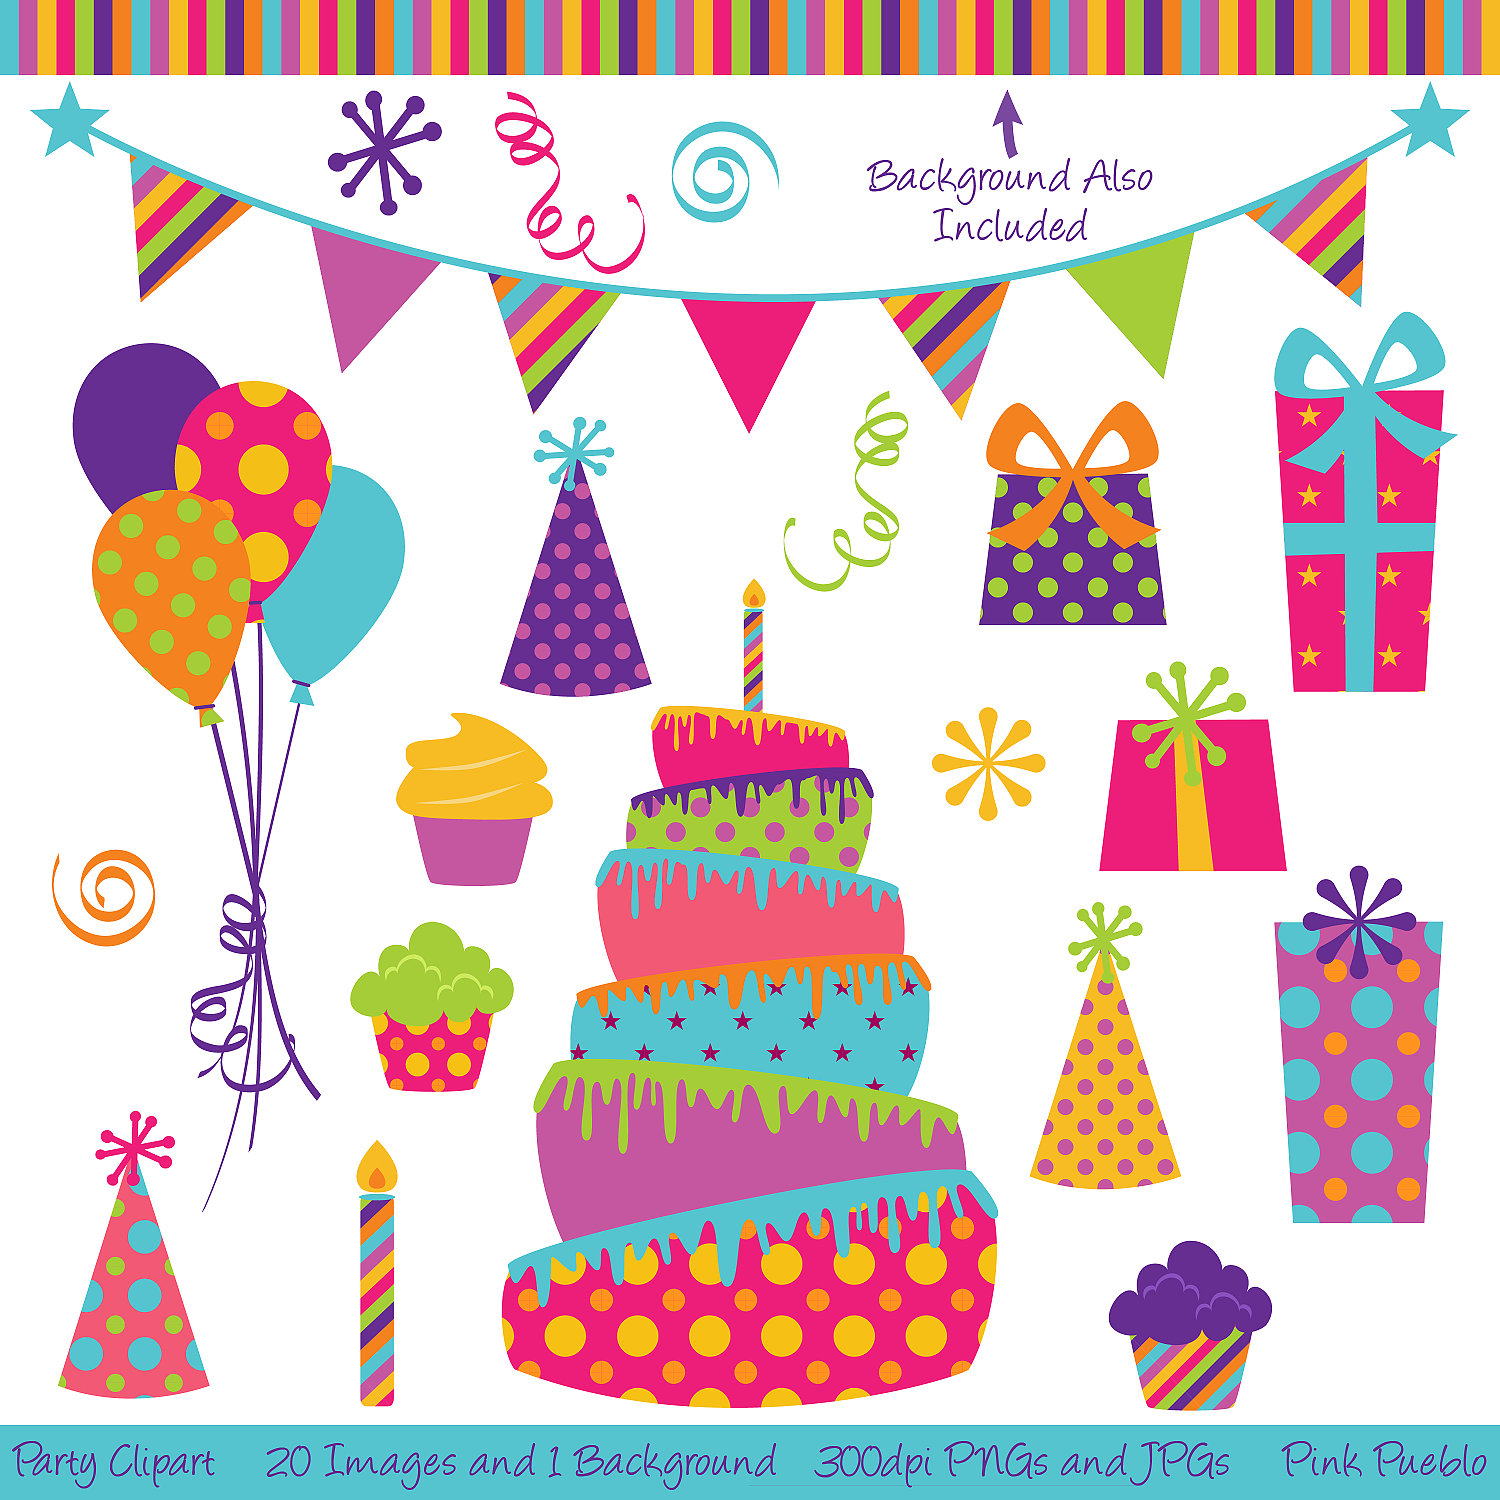 Vintage birthday party clipart .